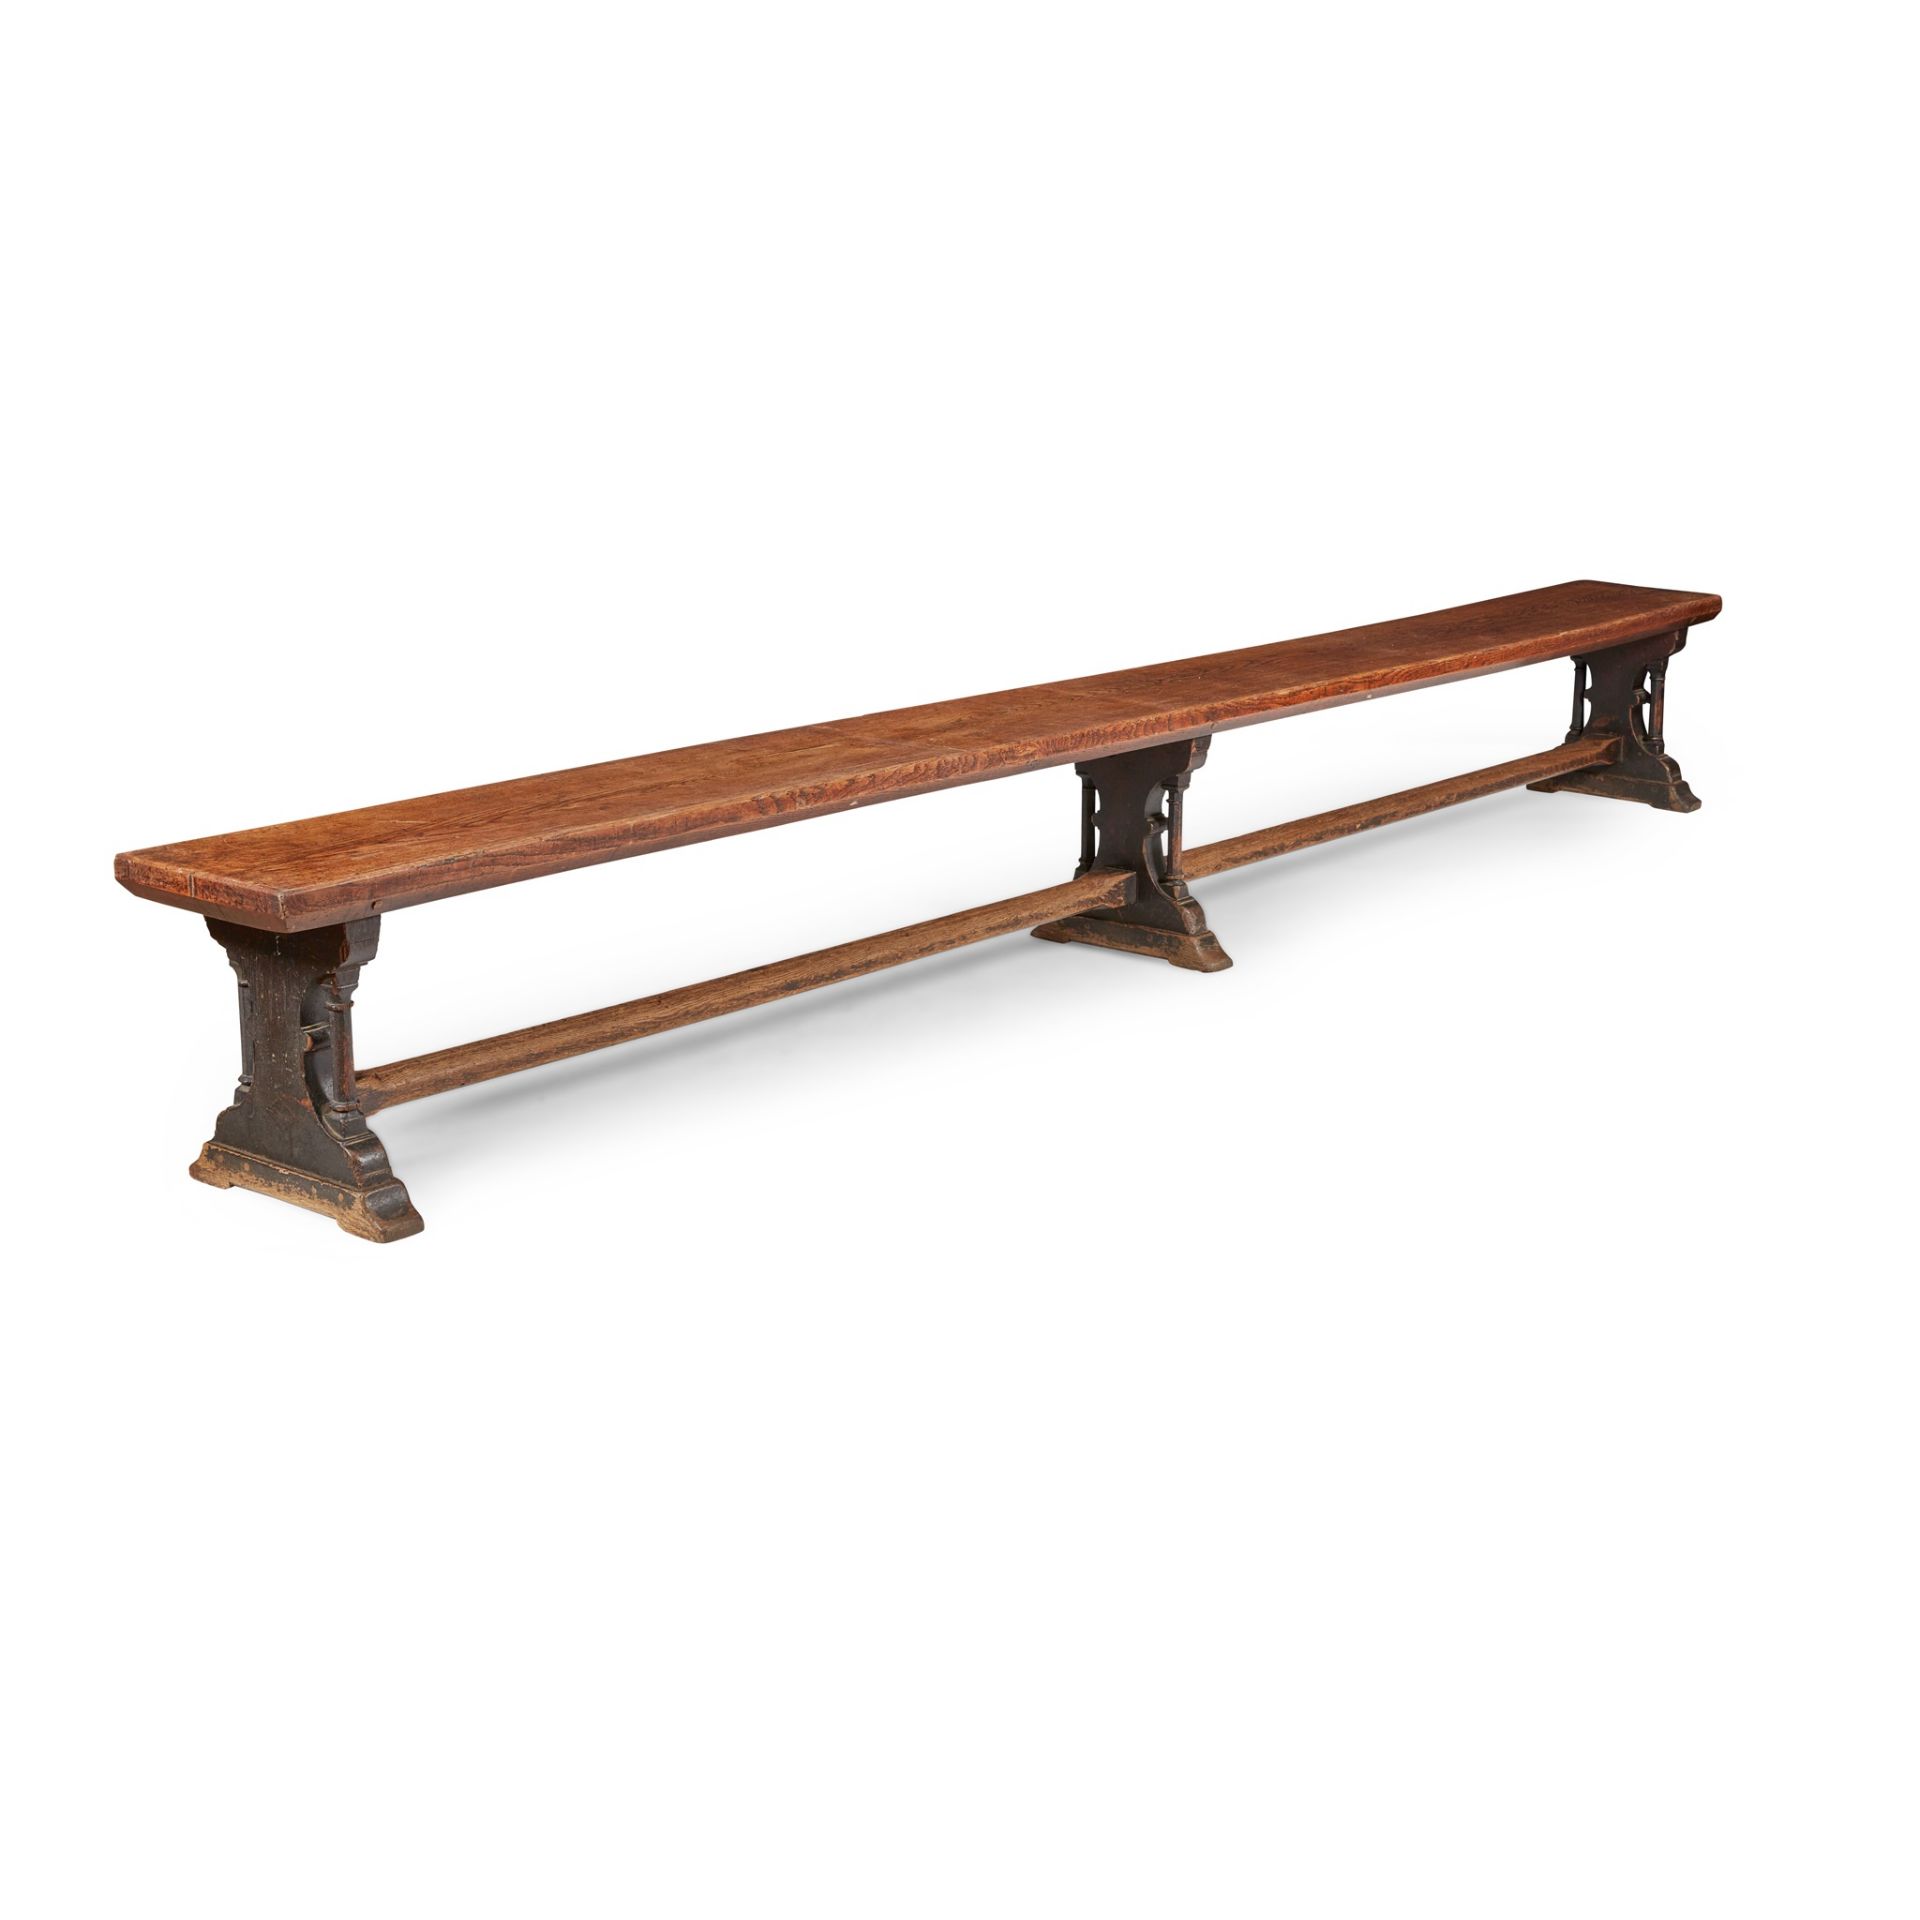 ENGLISH PAIR OF GOTHIC REVIVAL BENCHES, CIRCA 1870 - Image 3 of 3